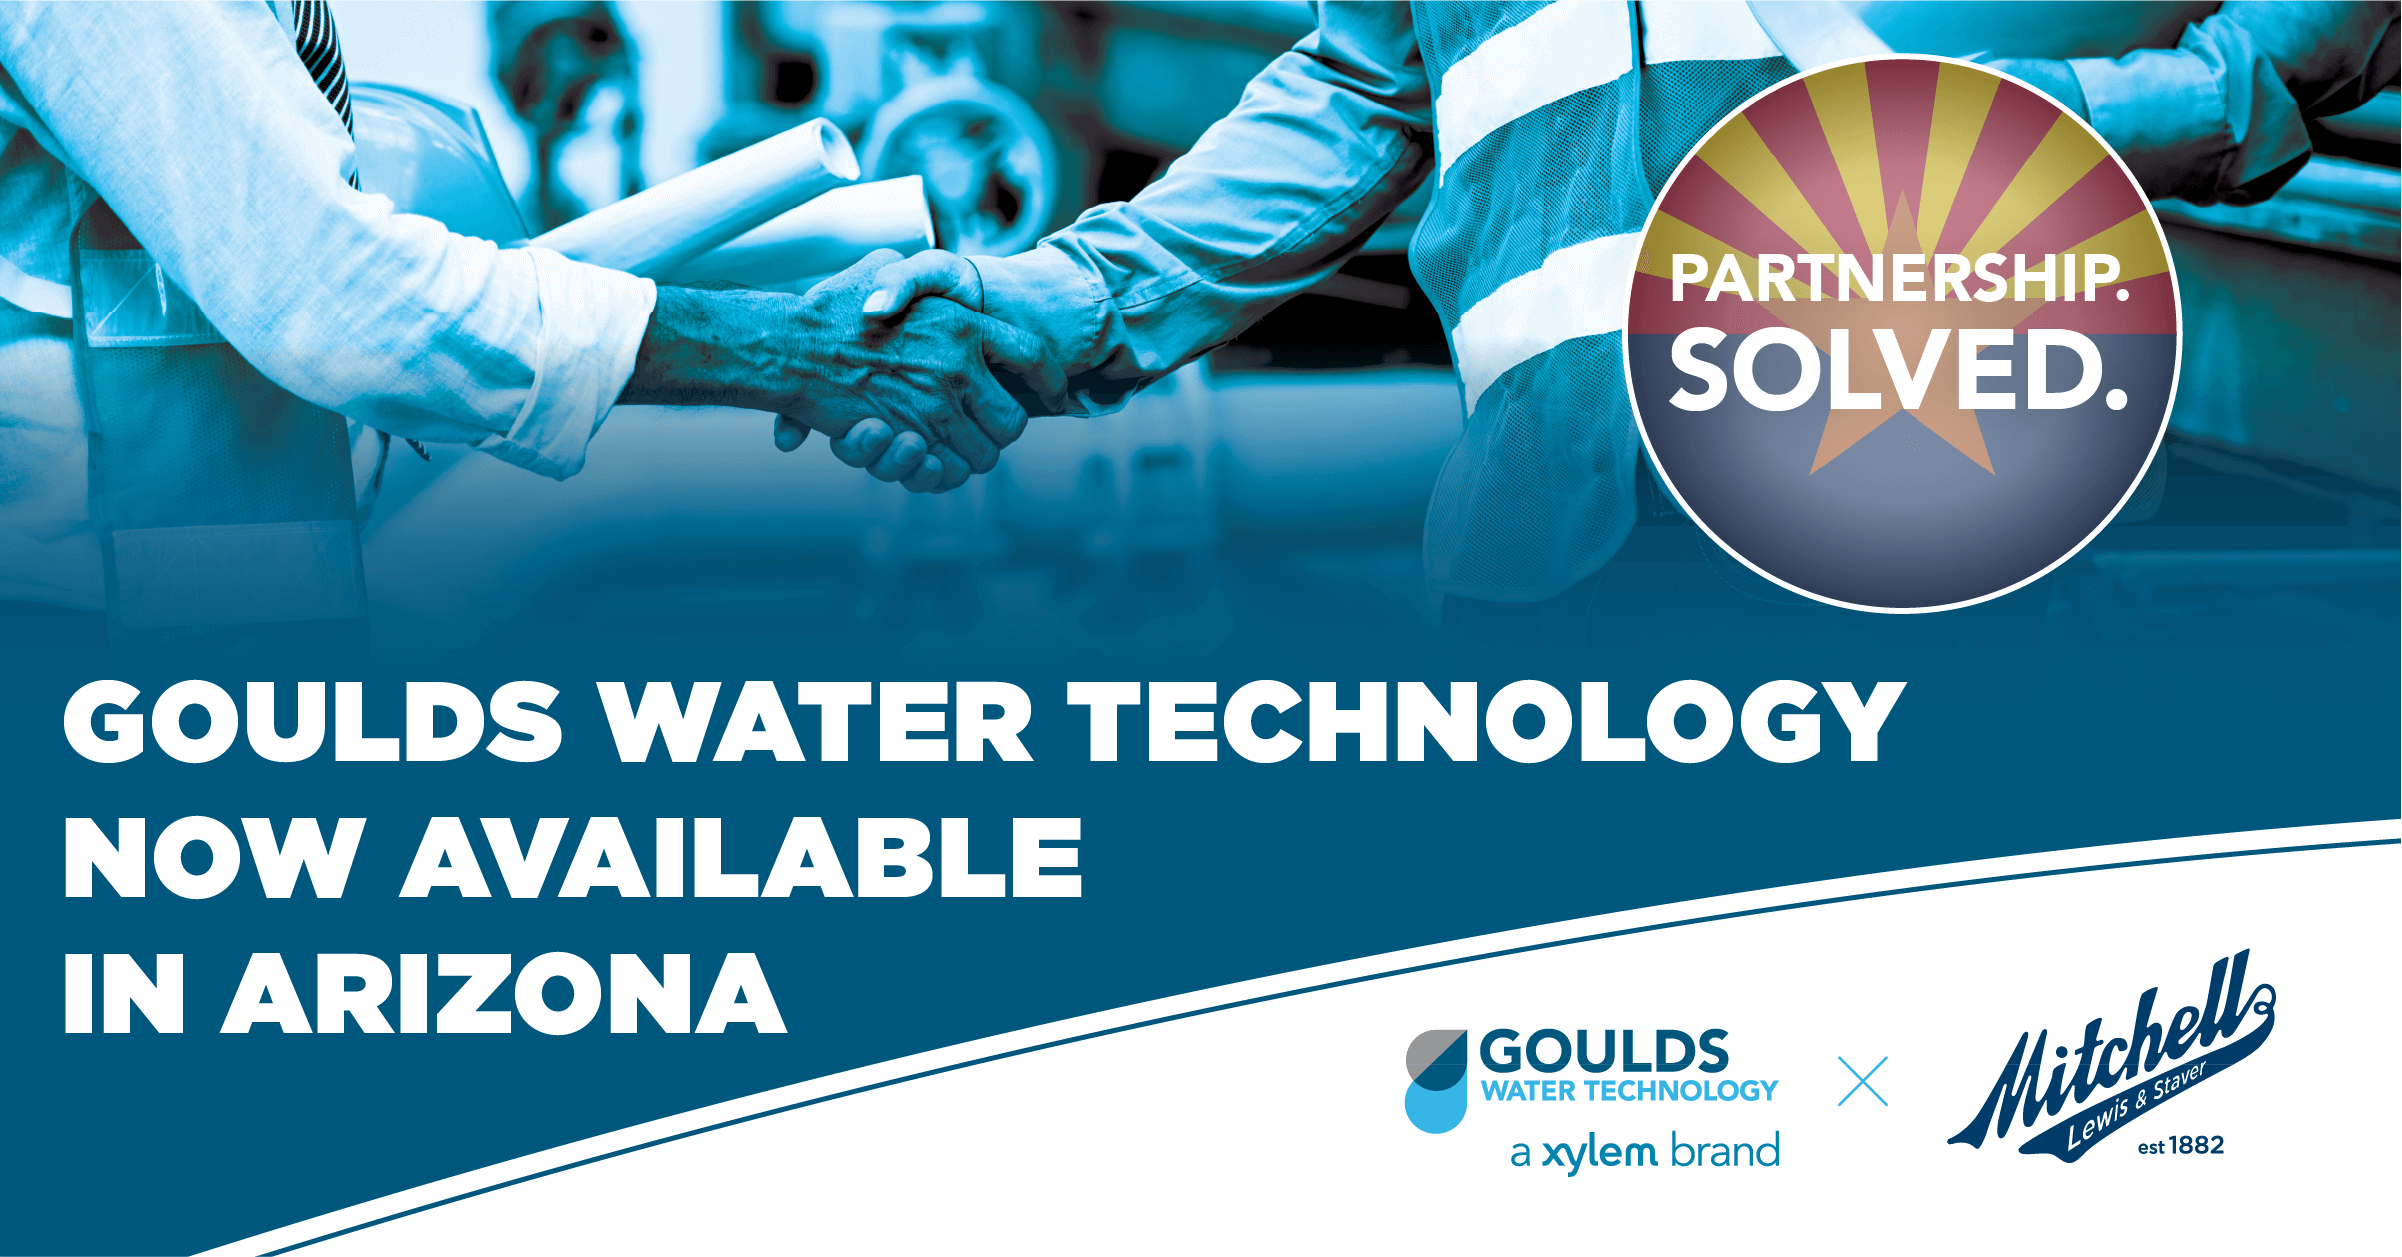 Mitchell Lewis & Staver Partners with Goulds Water Technology in Arizona